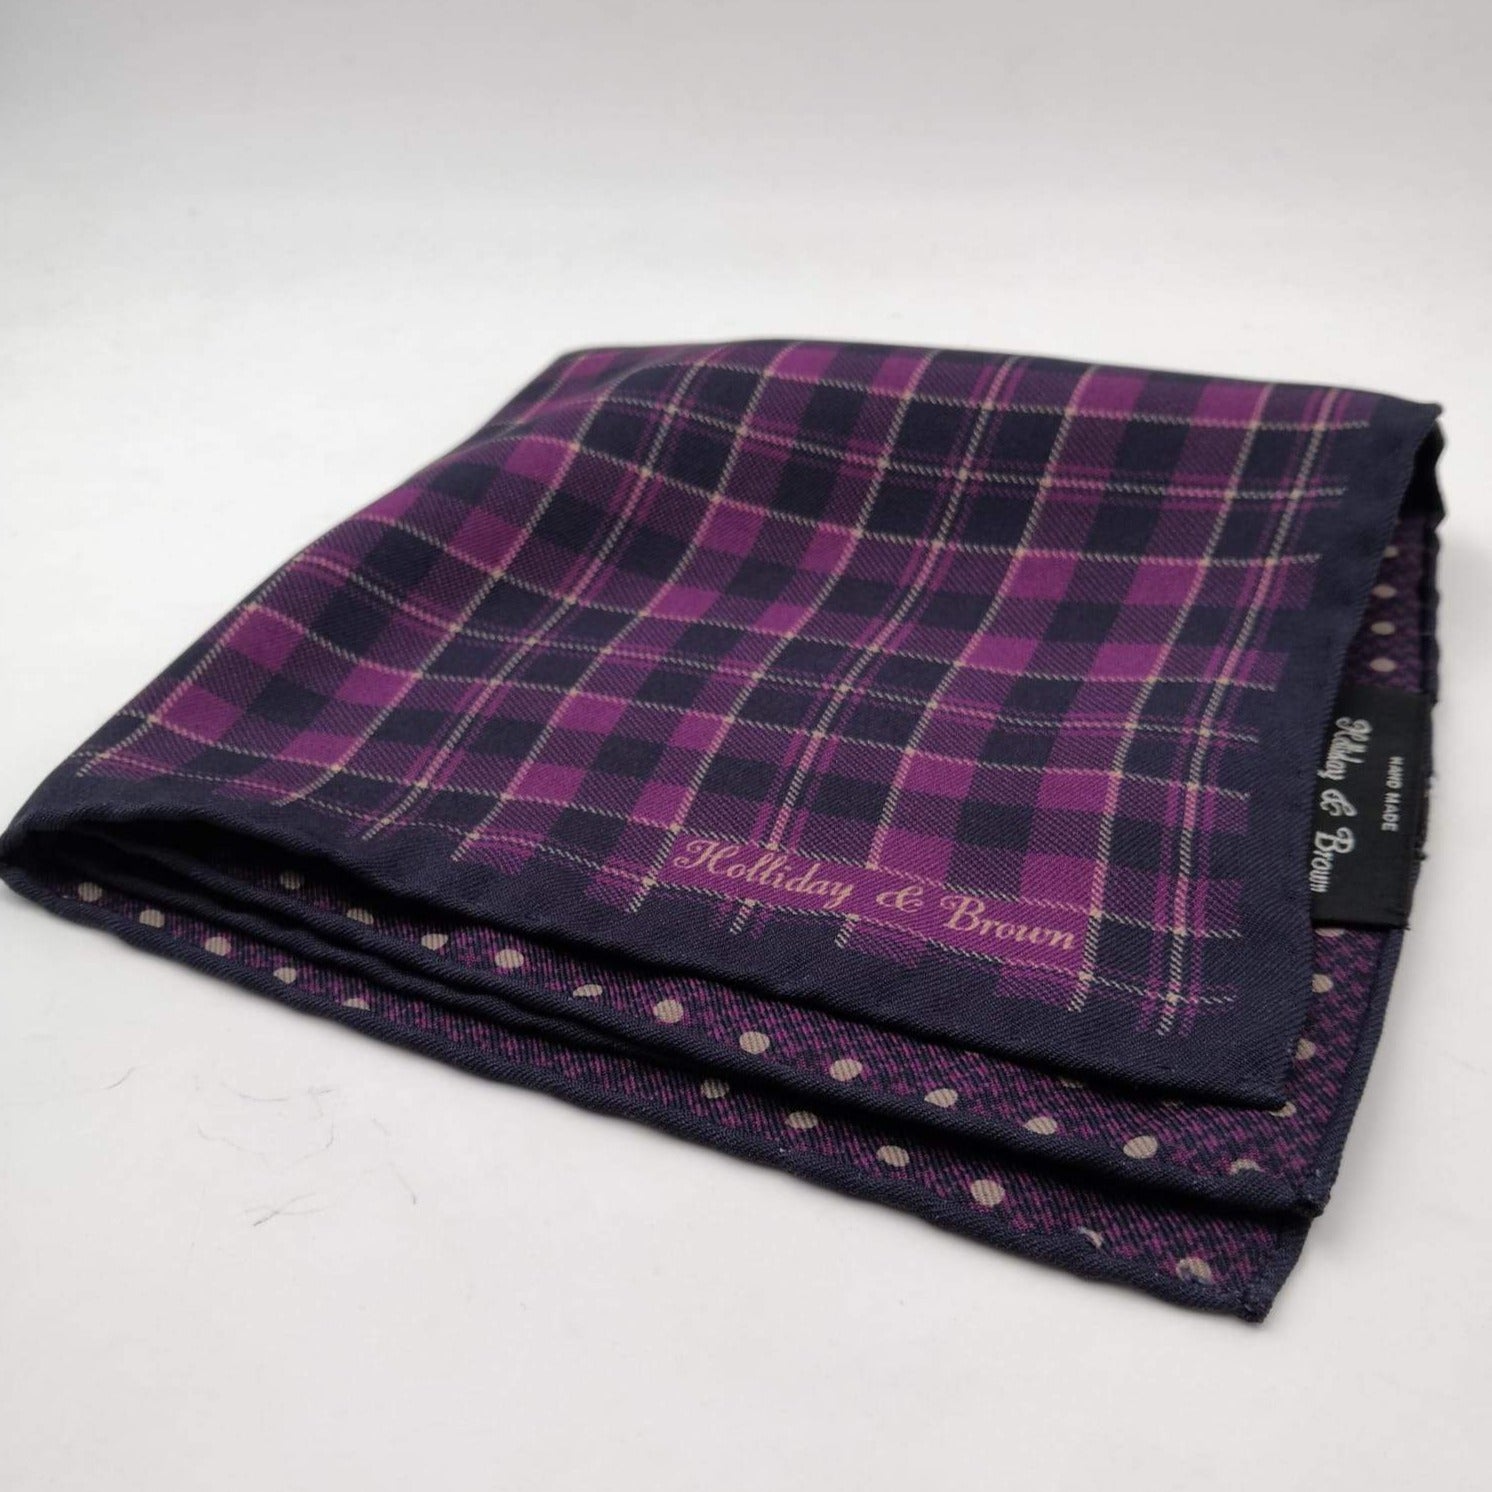 Holliday & Brown Hand-rolled   Holliday & Brown for Cruciani & Bella 100% Silk Blue and Purple Double Faces Patterned  Motif  Pocket Square Handmade in Italy 32 cm X 32 cm #5774